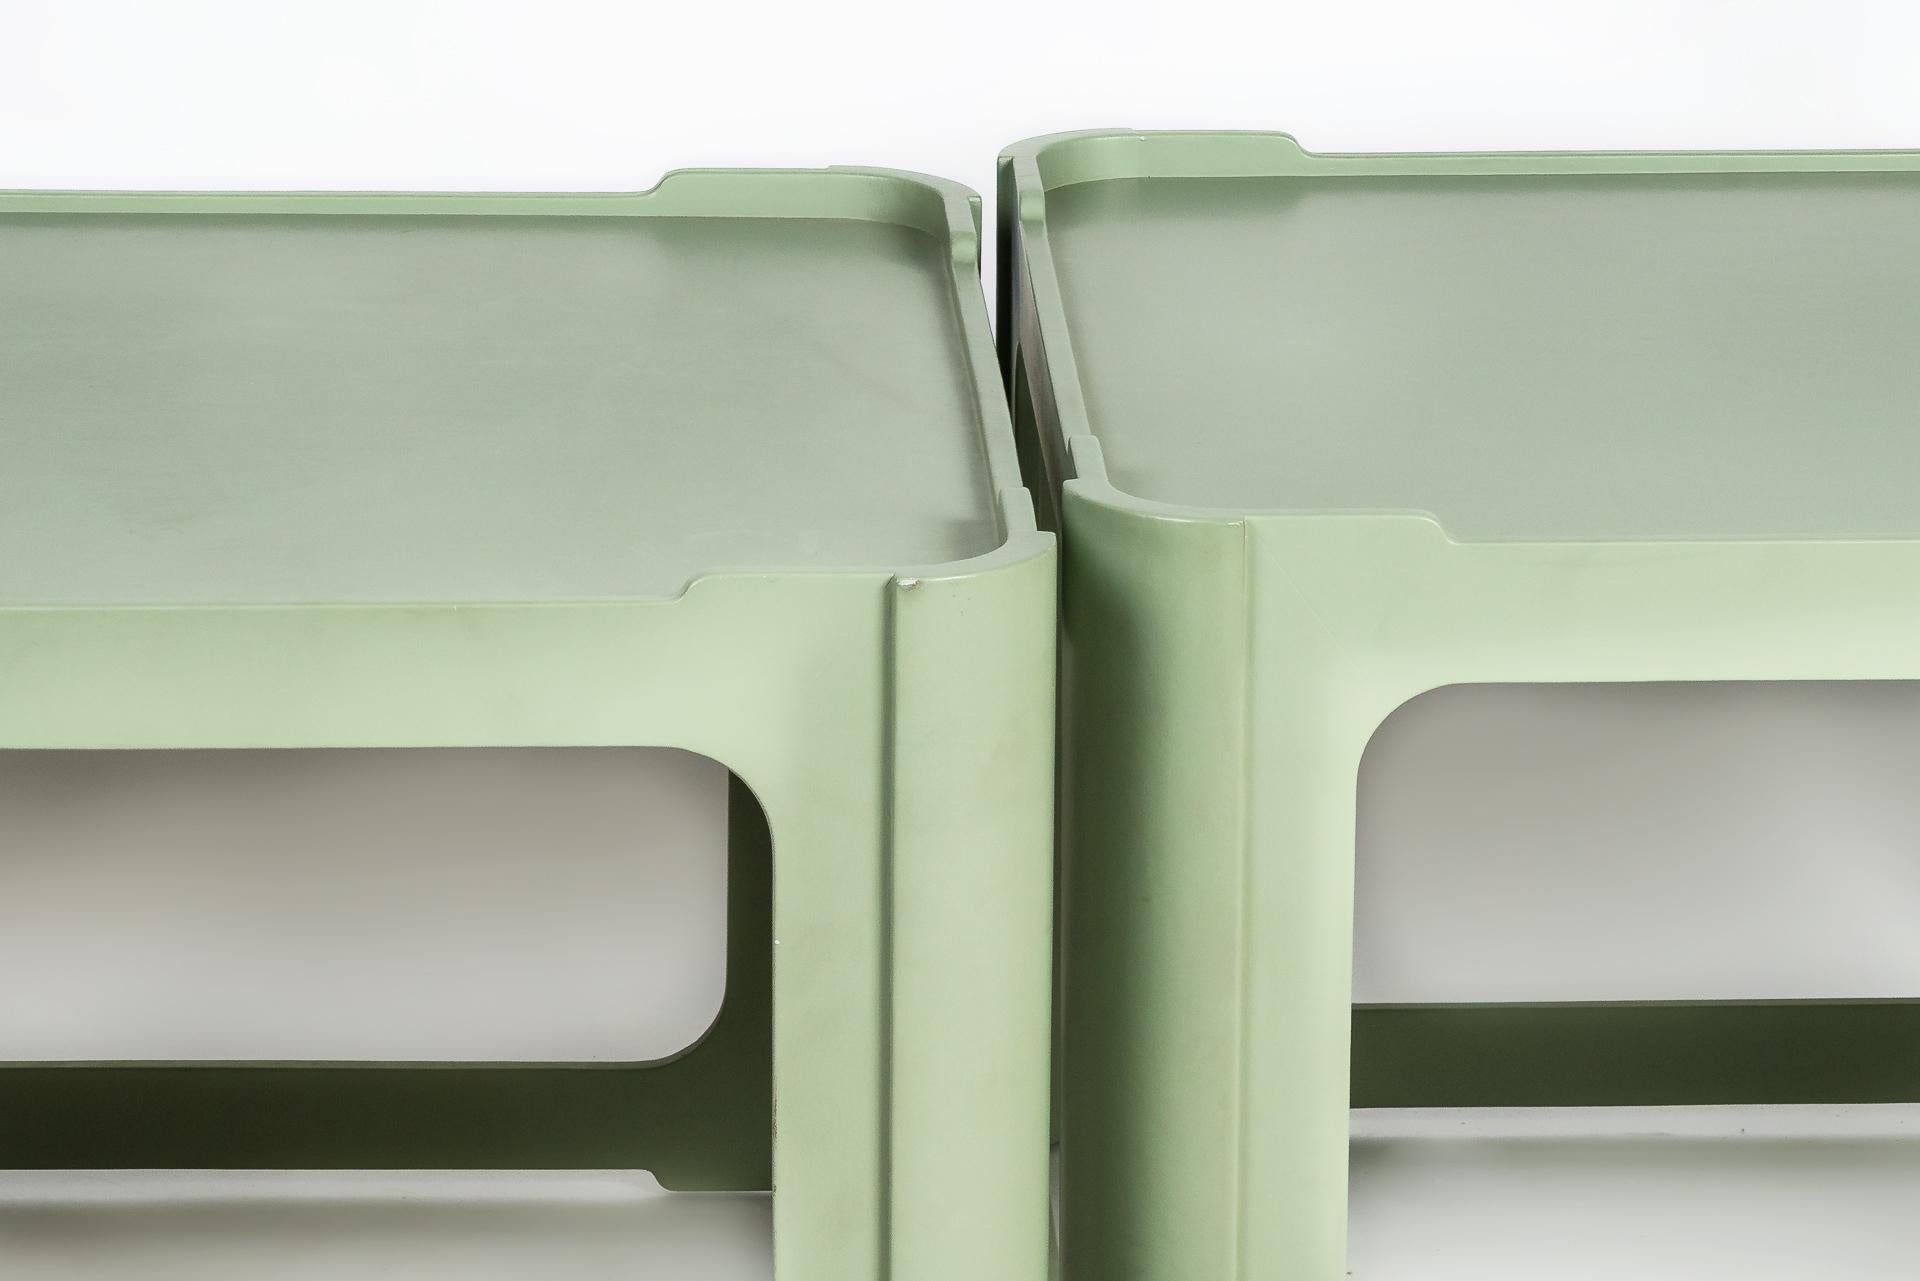 These very rare and modern pair of side tables of Karl Springer have beautiful details and are completely covered in mint leather. The Model was called ´Korean End Table´ and impress with their high-quality workmanship and the design details